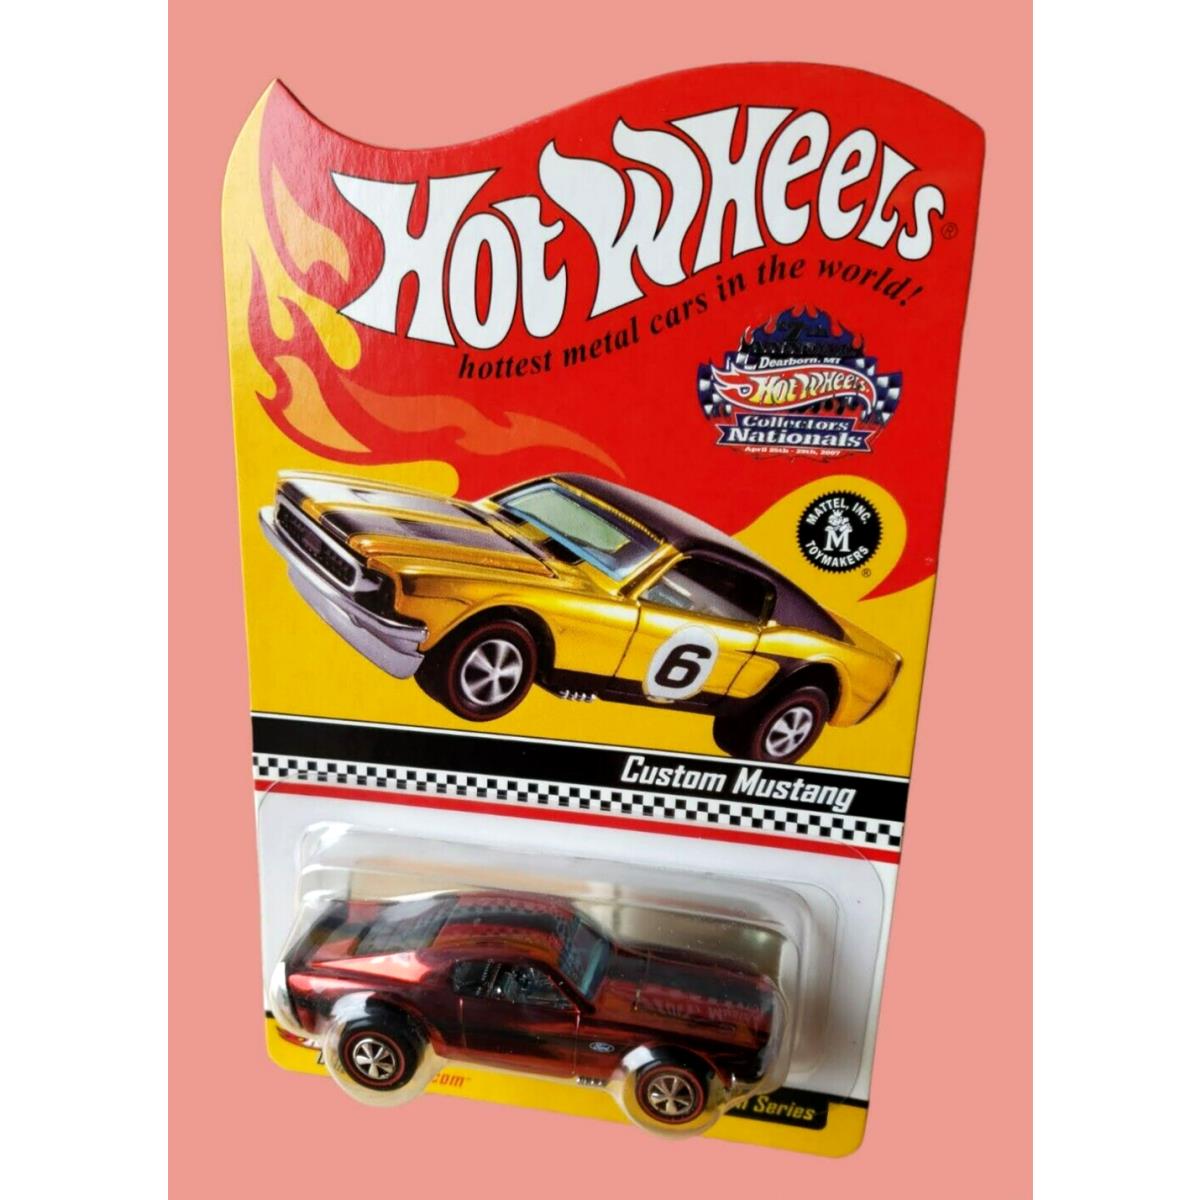 2007 Hot Wheels Custom Mustang Red Convention Series Exclusive /10 000 1:64 Moc